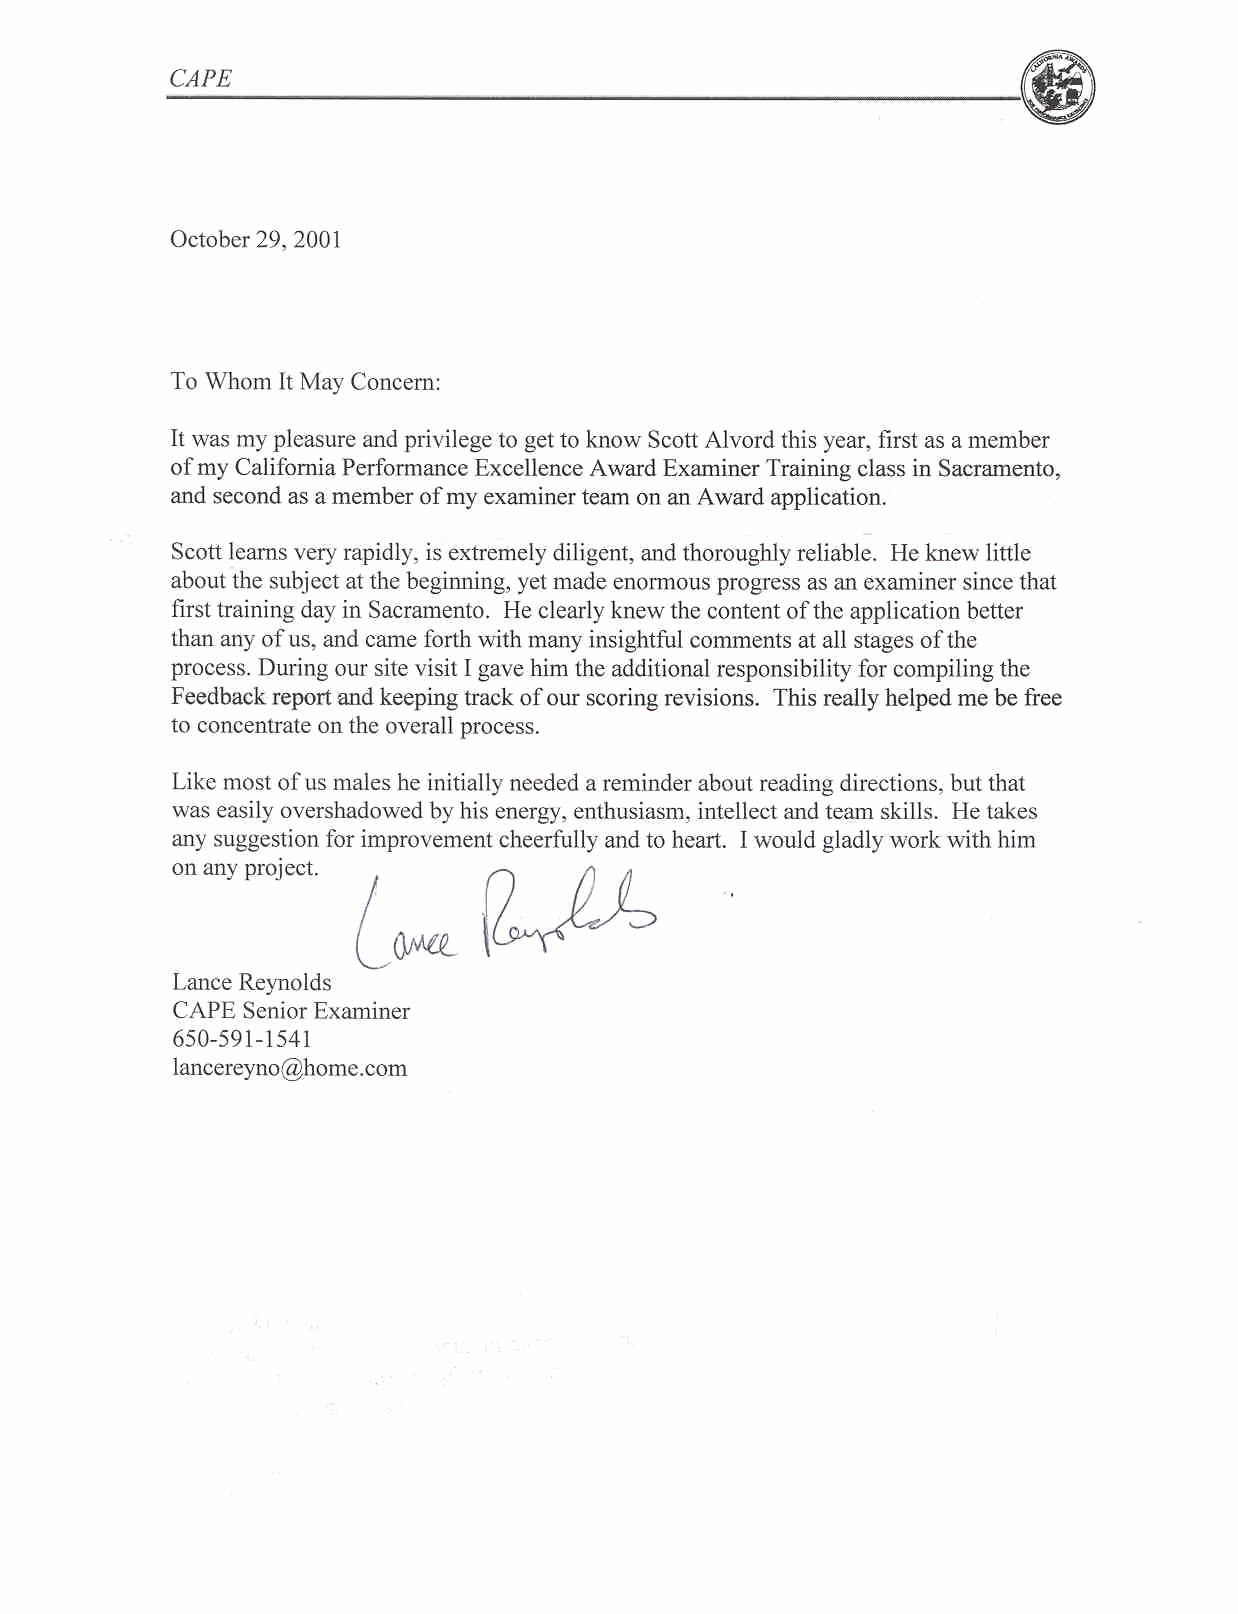 Letter Of Recommendation Template Free Beautiful Letter Of Re Mendation Portal 5 Ways to Get Standout Law